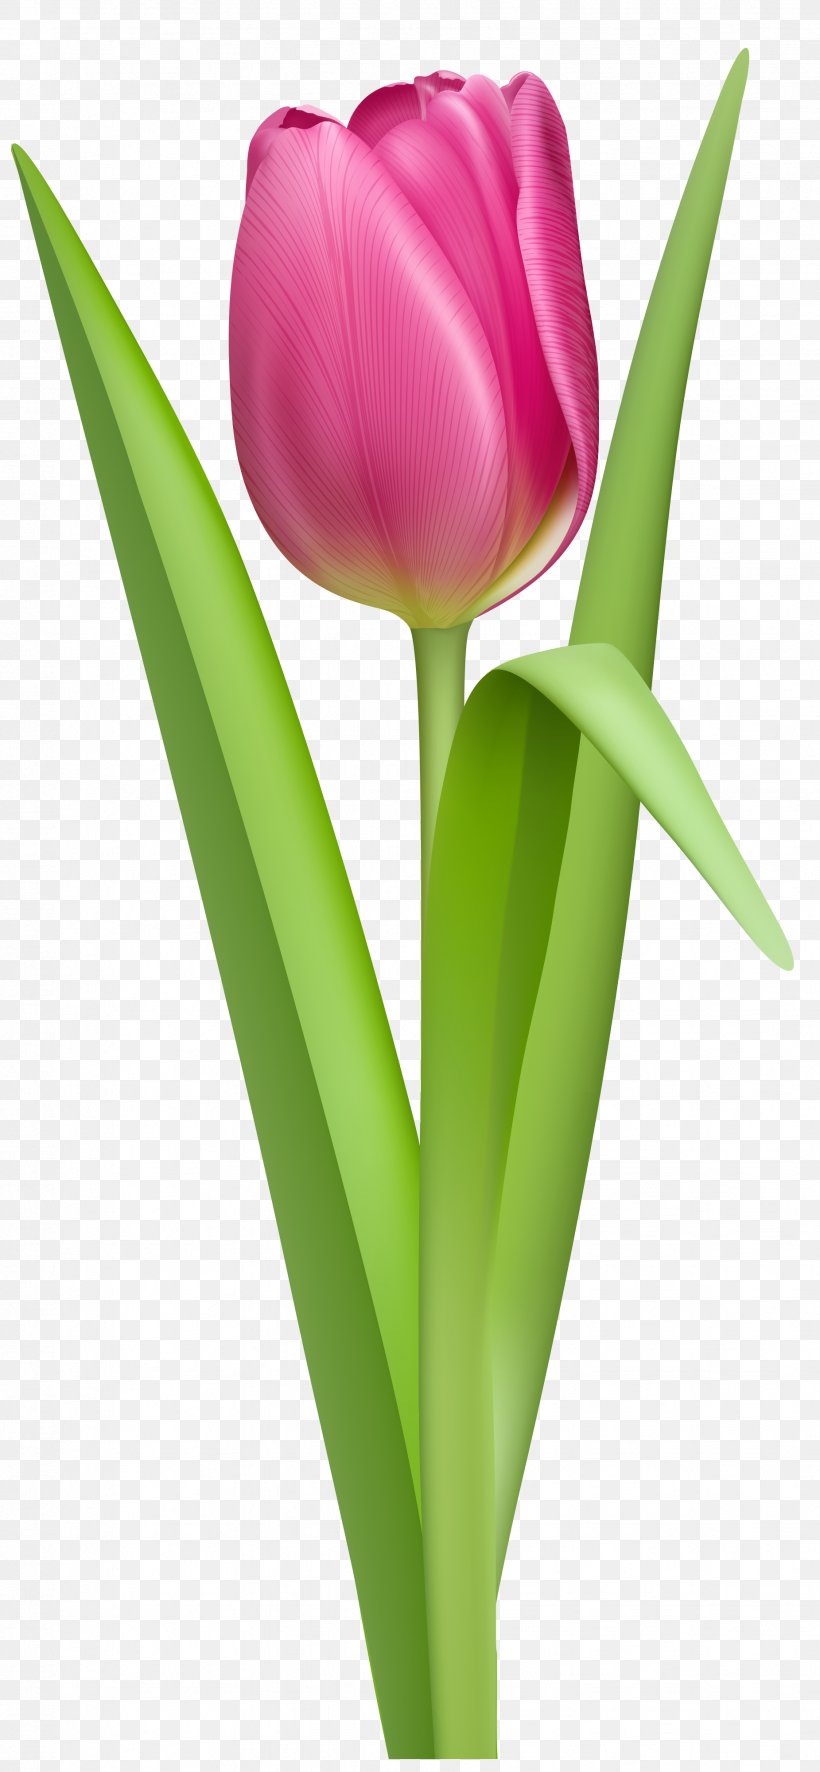 The Tulip: The Story Of A Flower That Has Made Men Mad Computer File, PNG, 1851x4000px, Tulip, Document, Flower, Flowering Plant, Image File Formats Download Free